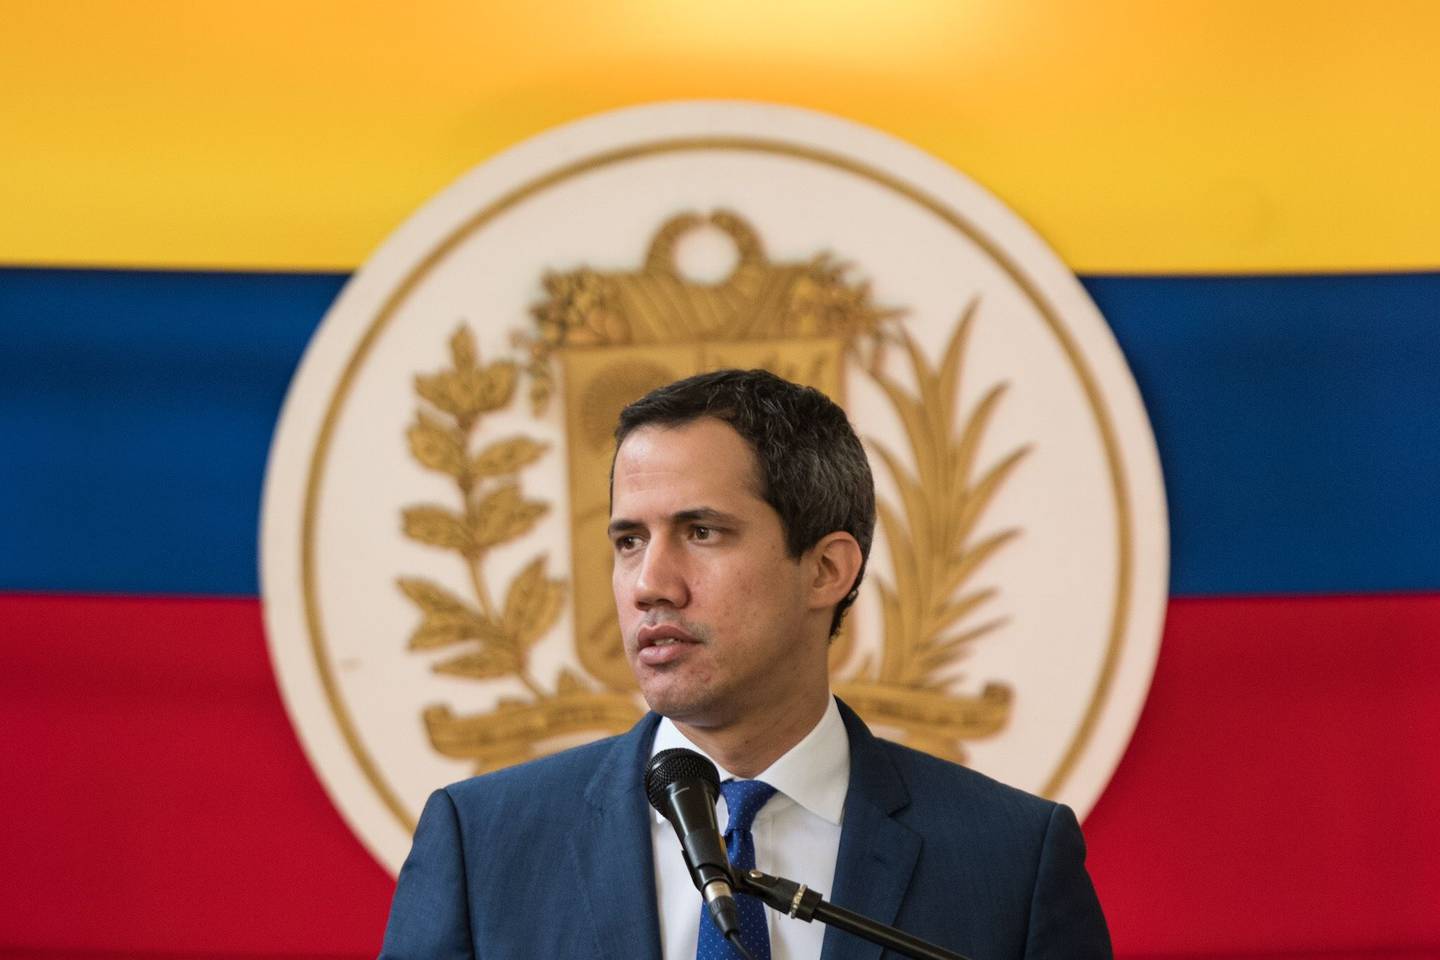 Juan Guaido, president of the National Assembly who swore himself as the leader of Venezuela, speaks during a news conference in Caracas, Venezuela, on Monday, Nov. 22, 2021. Venezuela's ruling socialist party won all but three races for governor in regional elections Sunday marked by low turnout amid splits within the U.S.-backed opposition and voter apathy following seven years of economic recession.